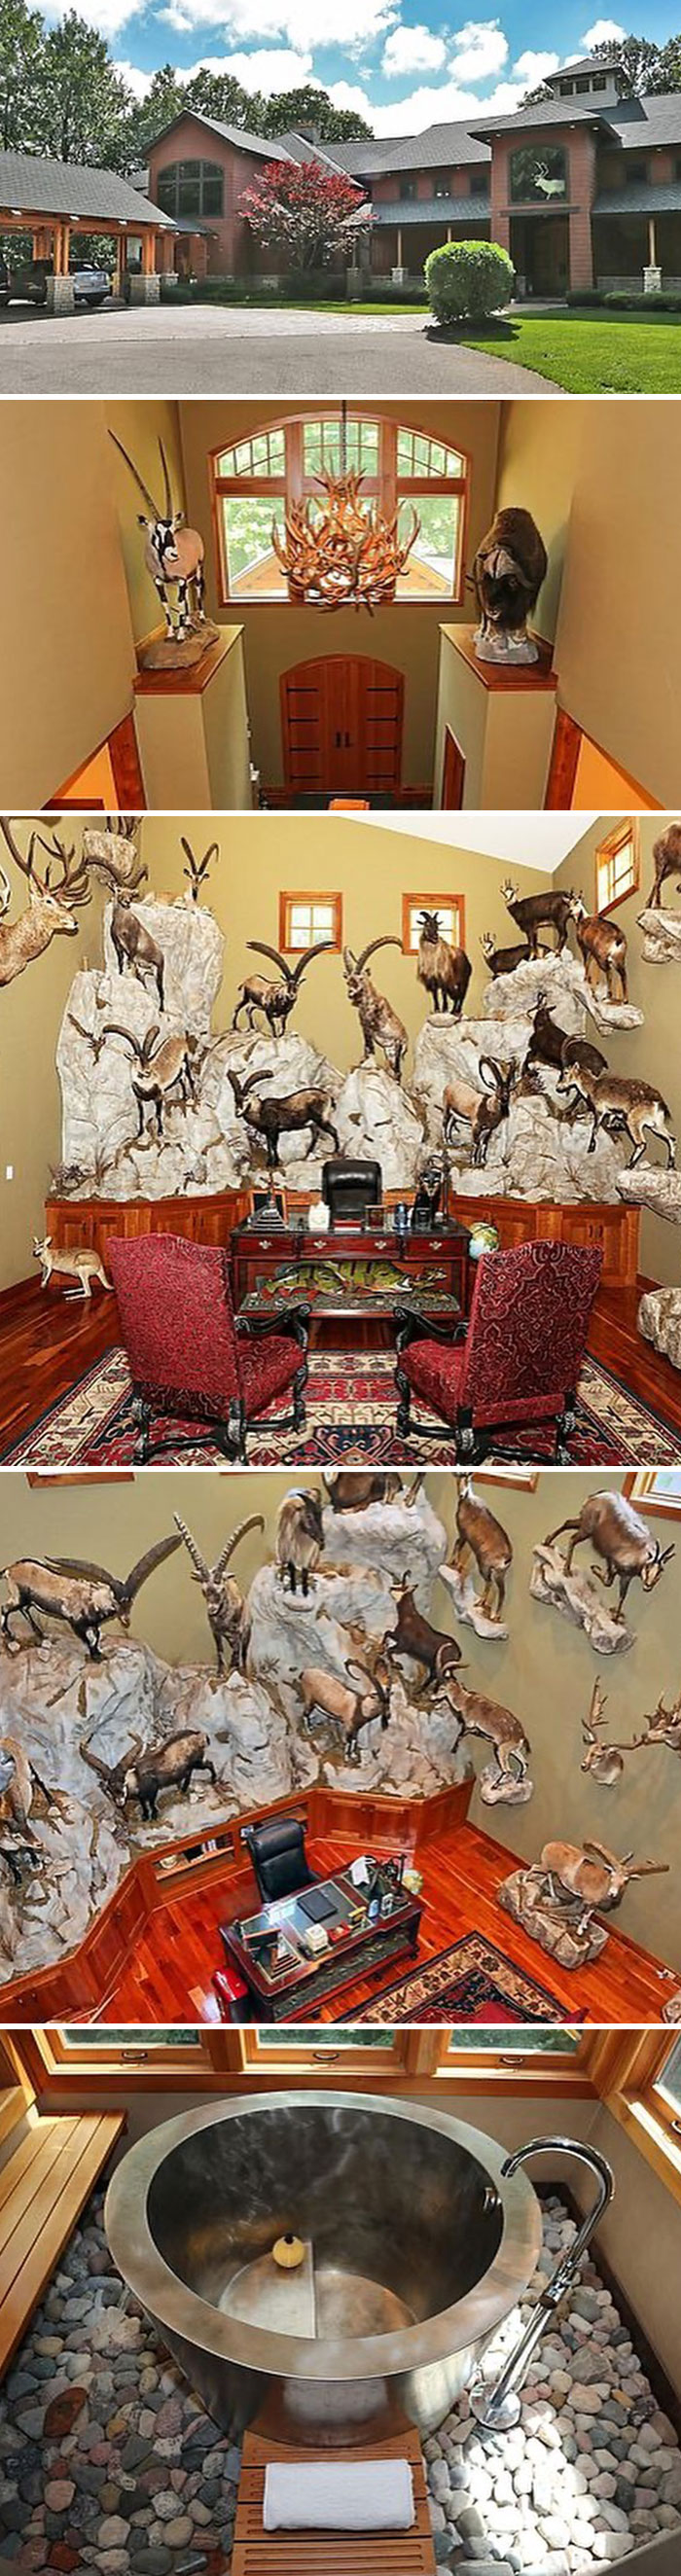 Welcome To Cabellas. I Can’t Tell If This Is All Real? Warning: Lots Of (Maybe?) Taxidermy. $1,899,000